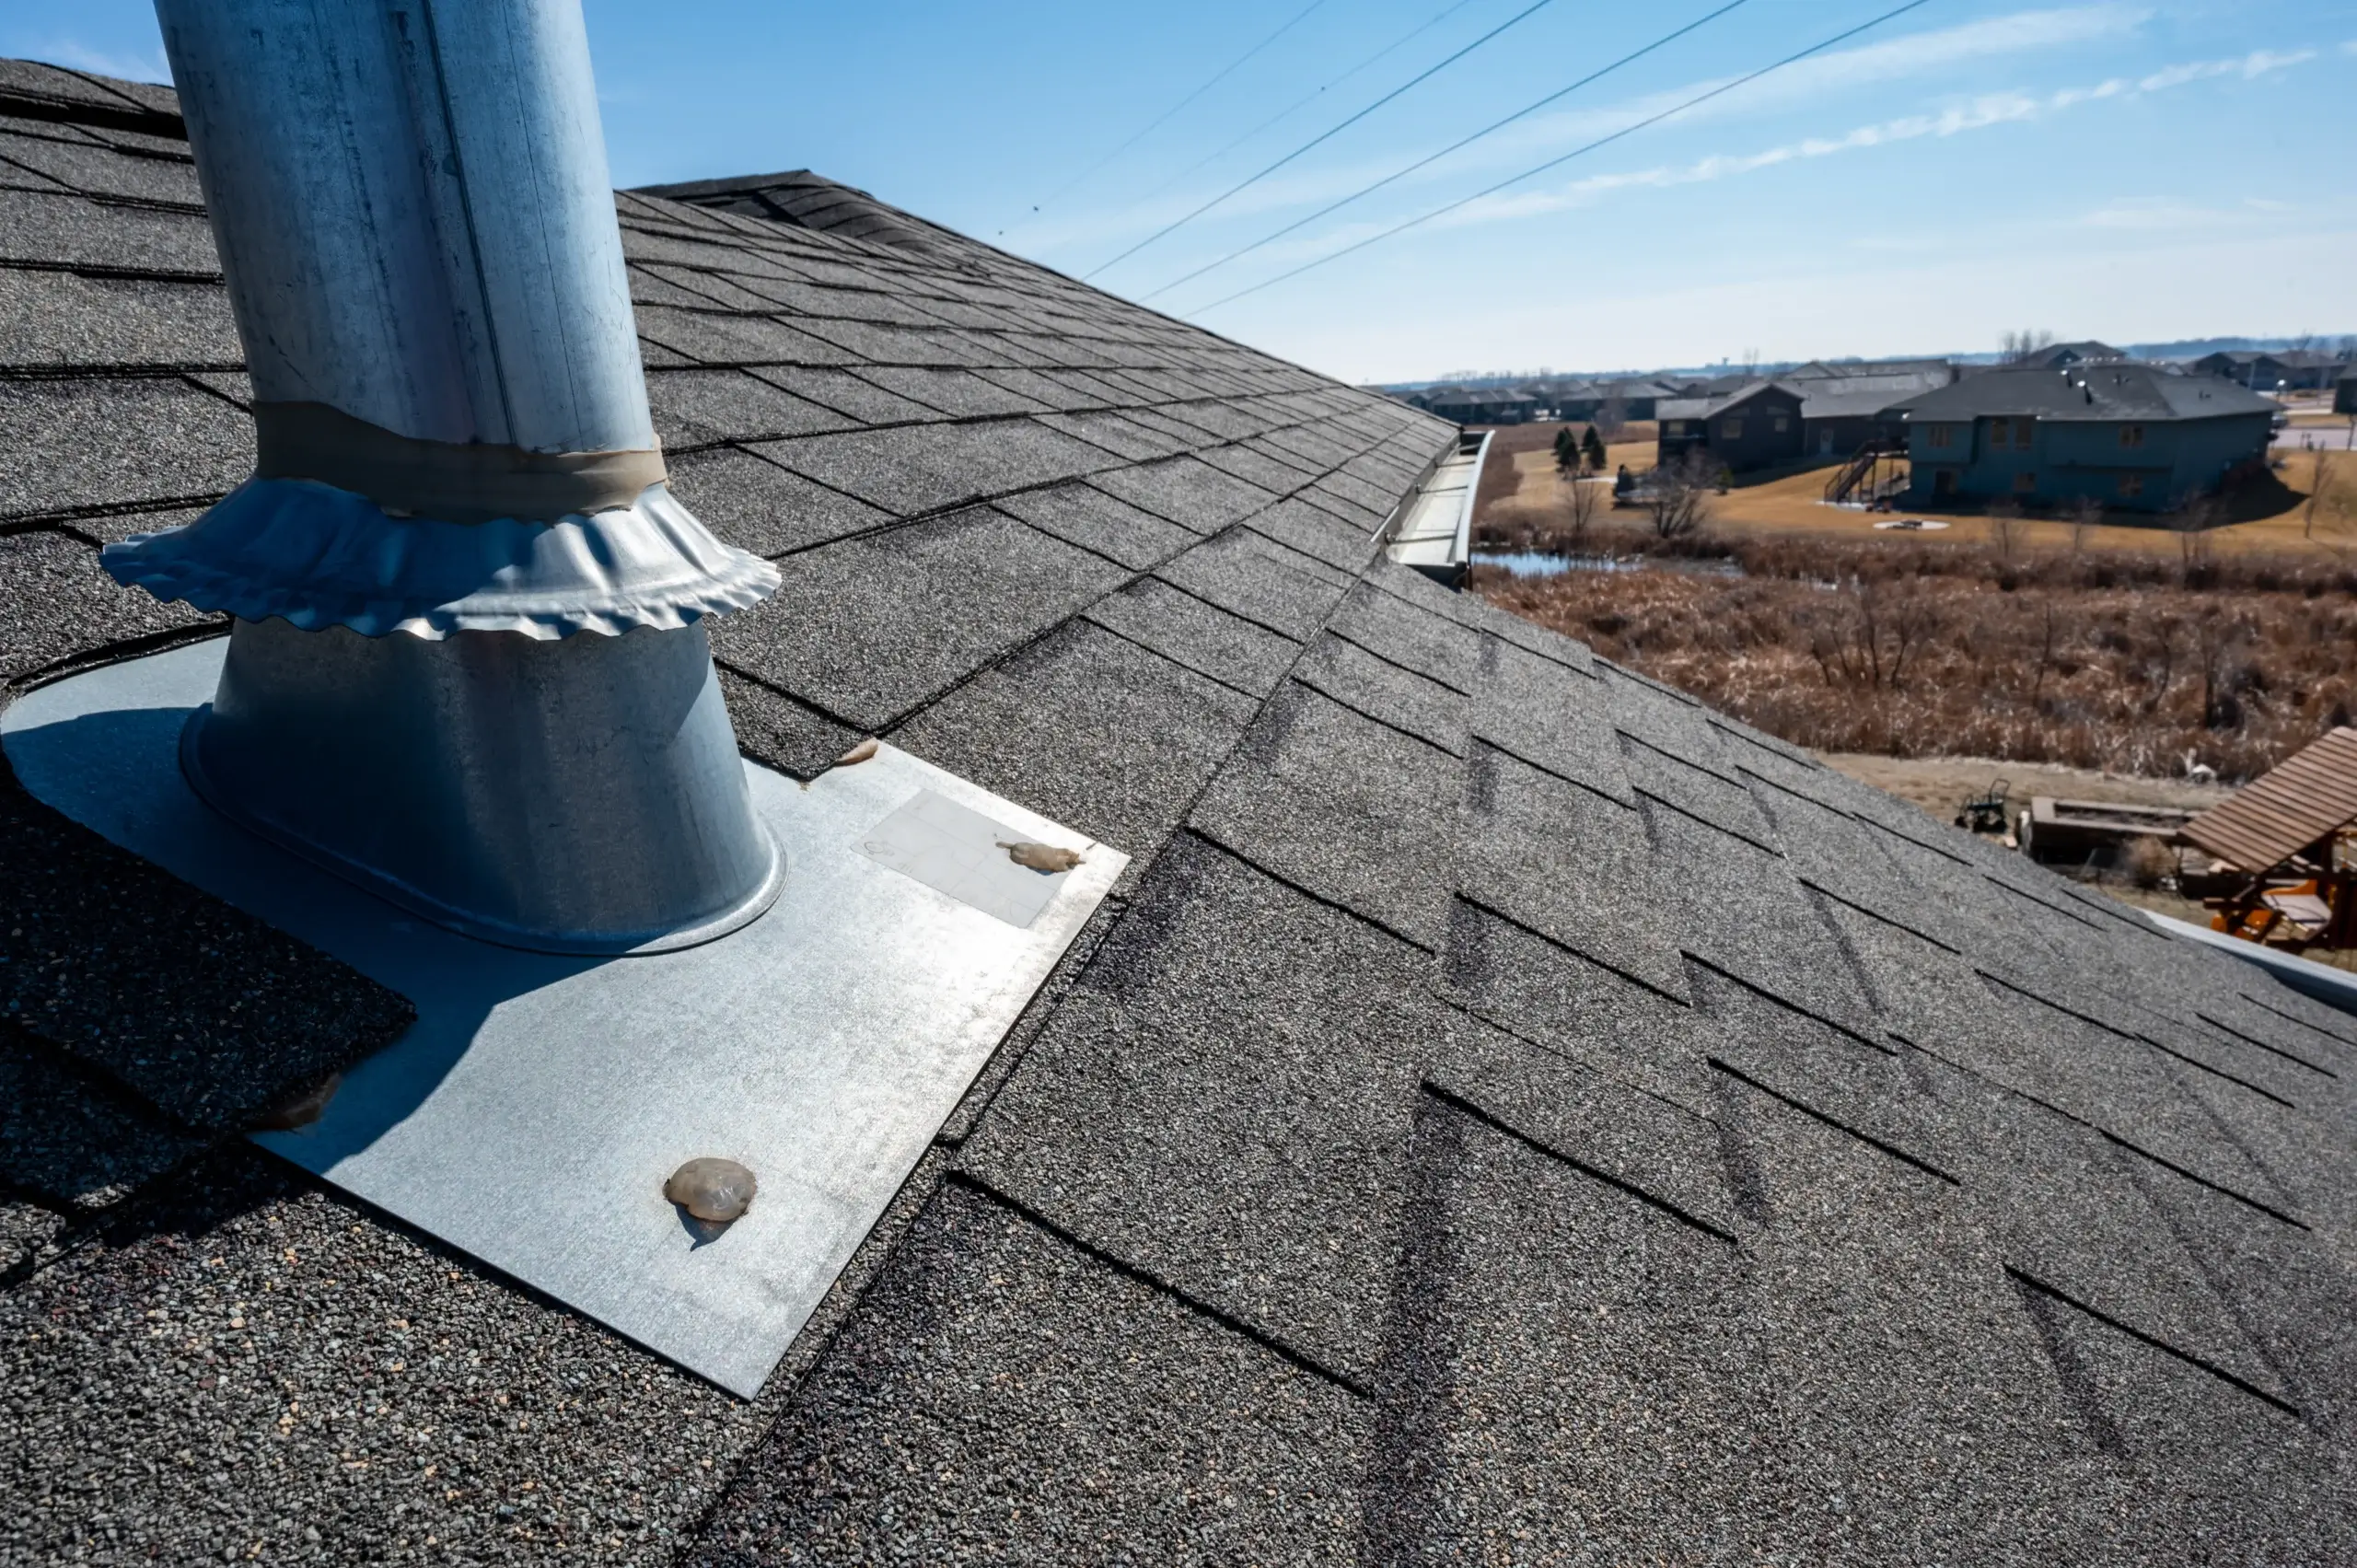 Types of Roof Flashings and How To Install Them